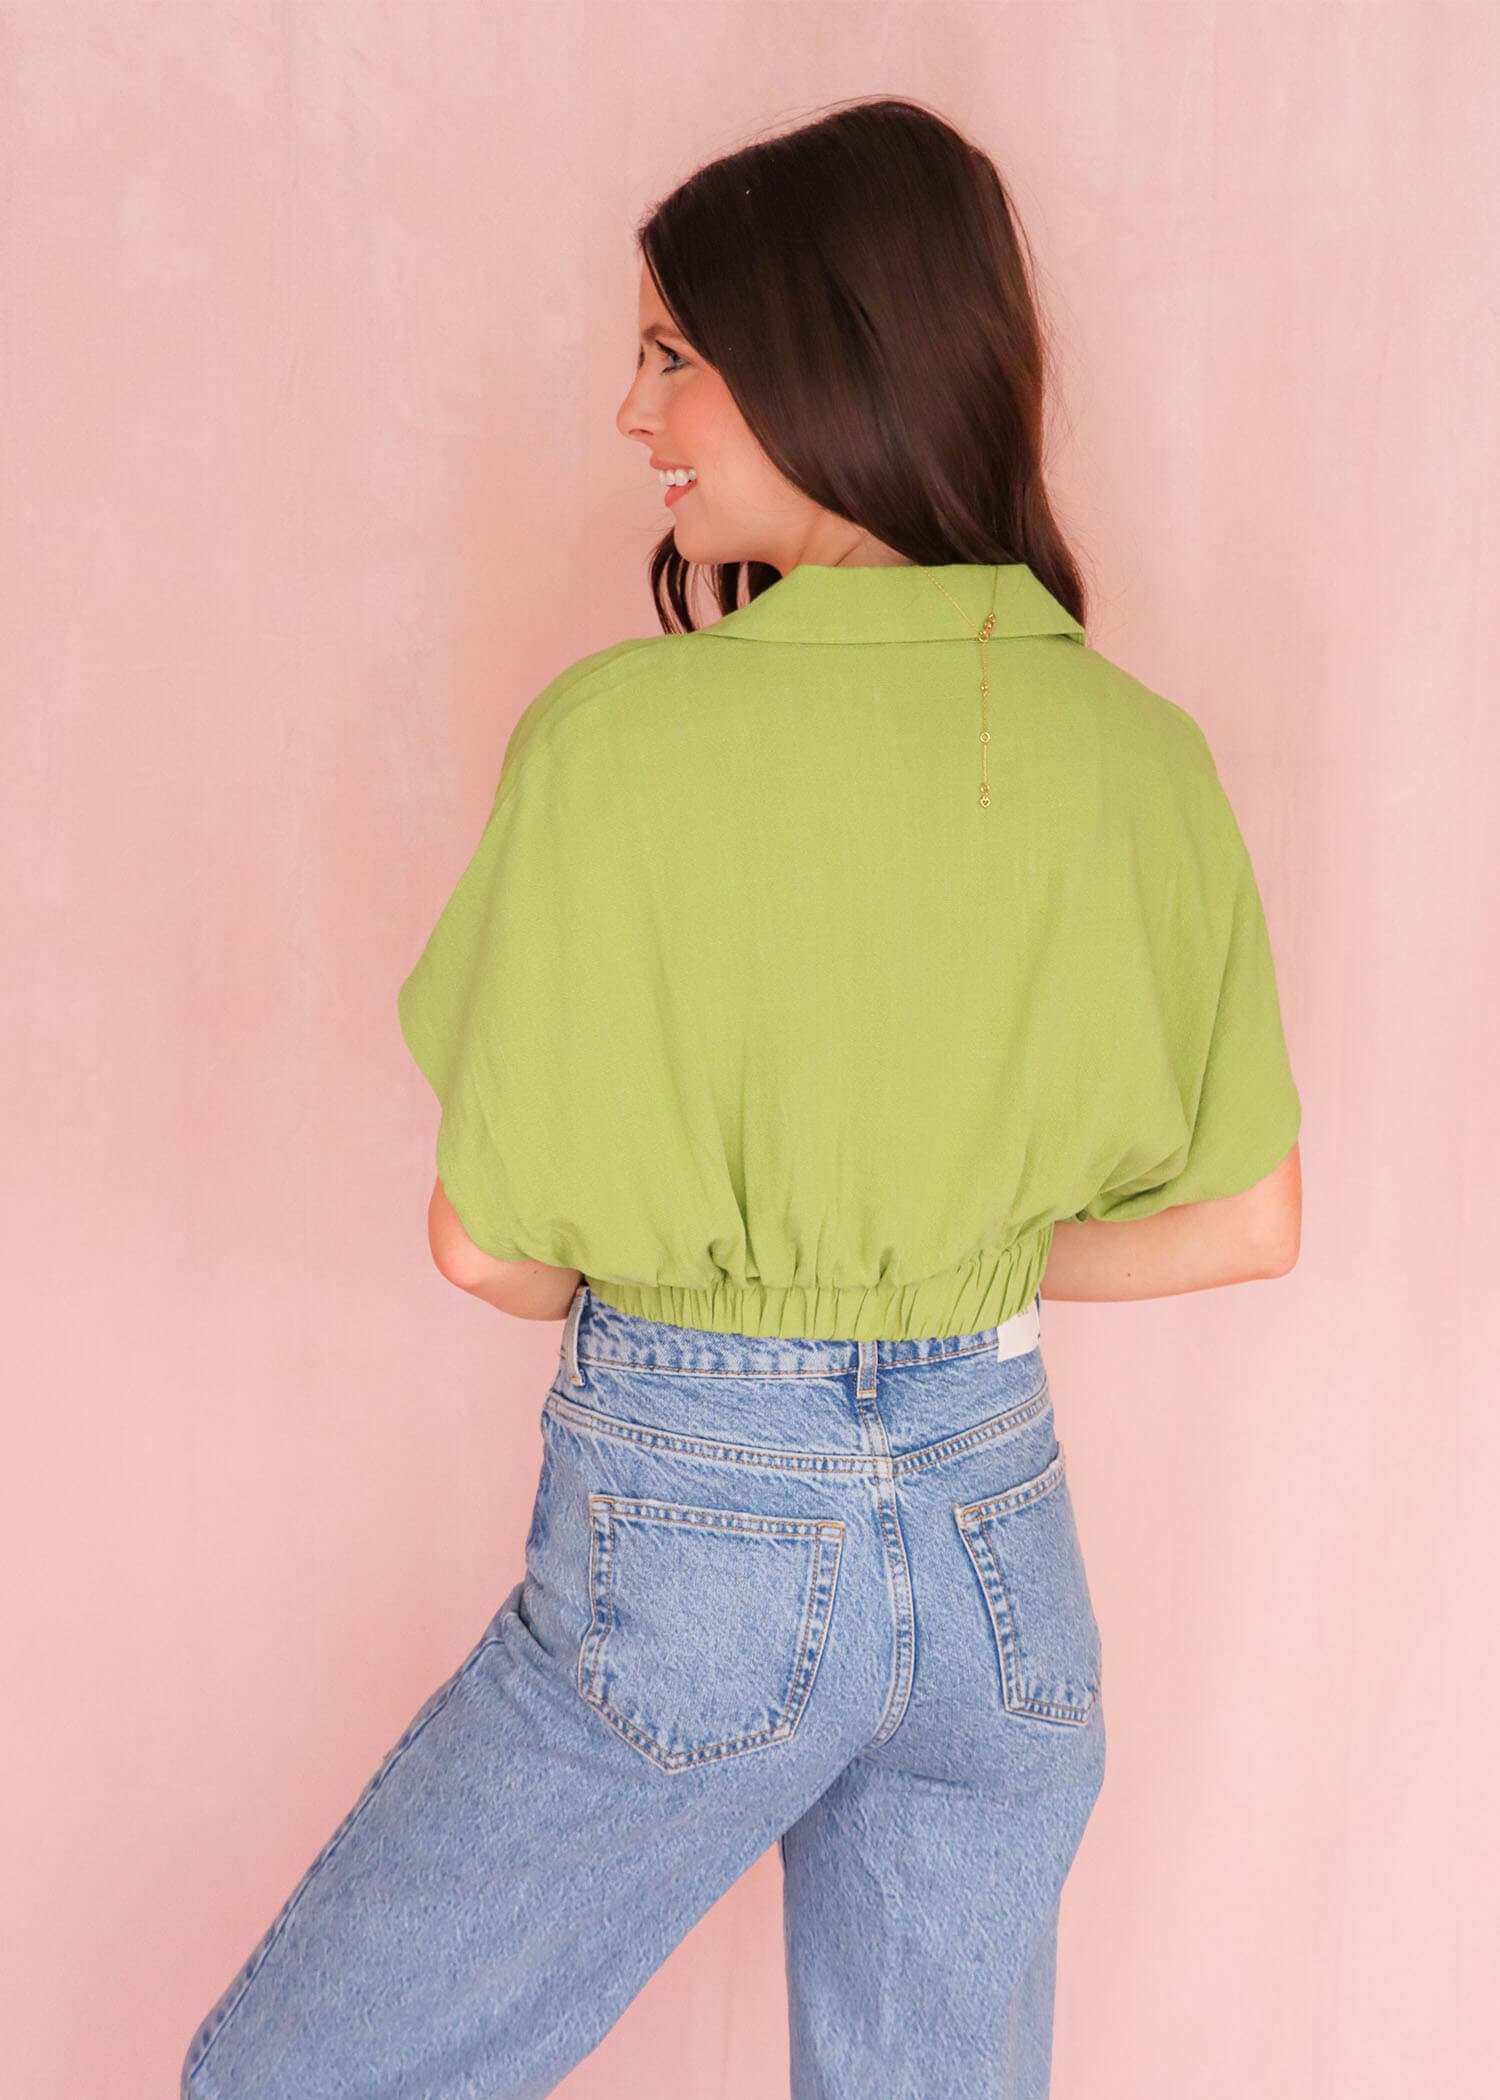 How You Feel Top - Pale Olive Tops MerciGrace Boutique.